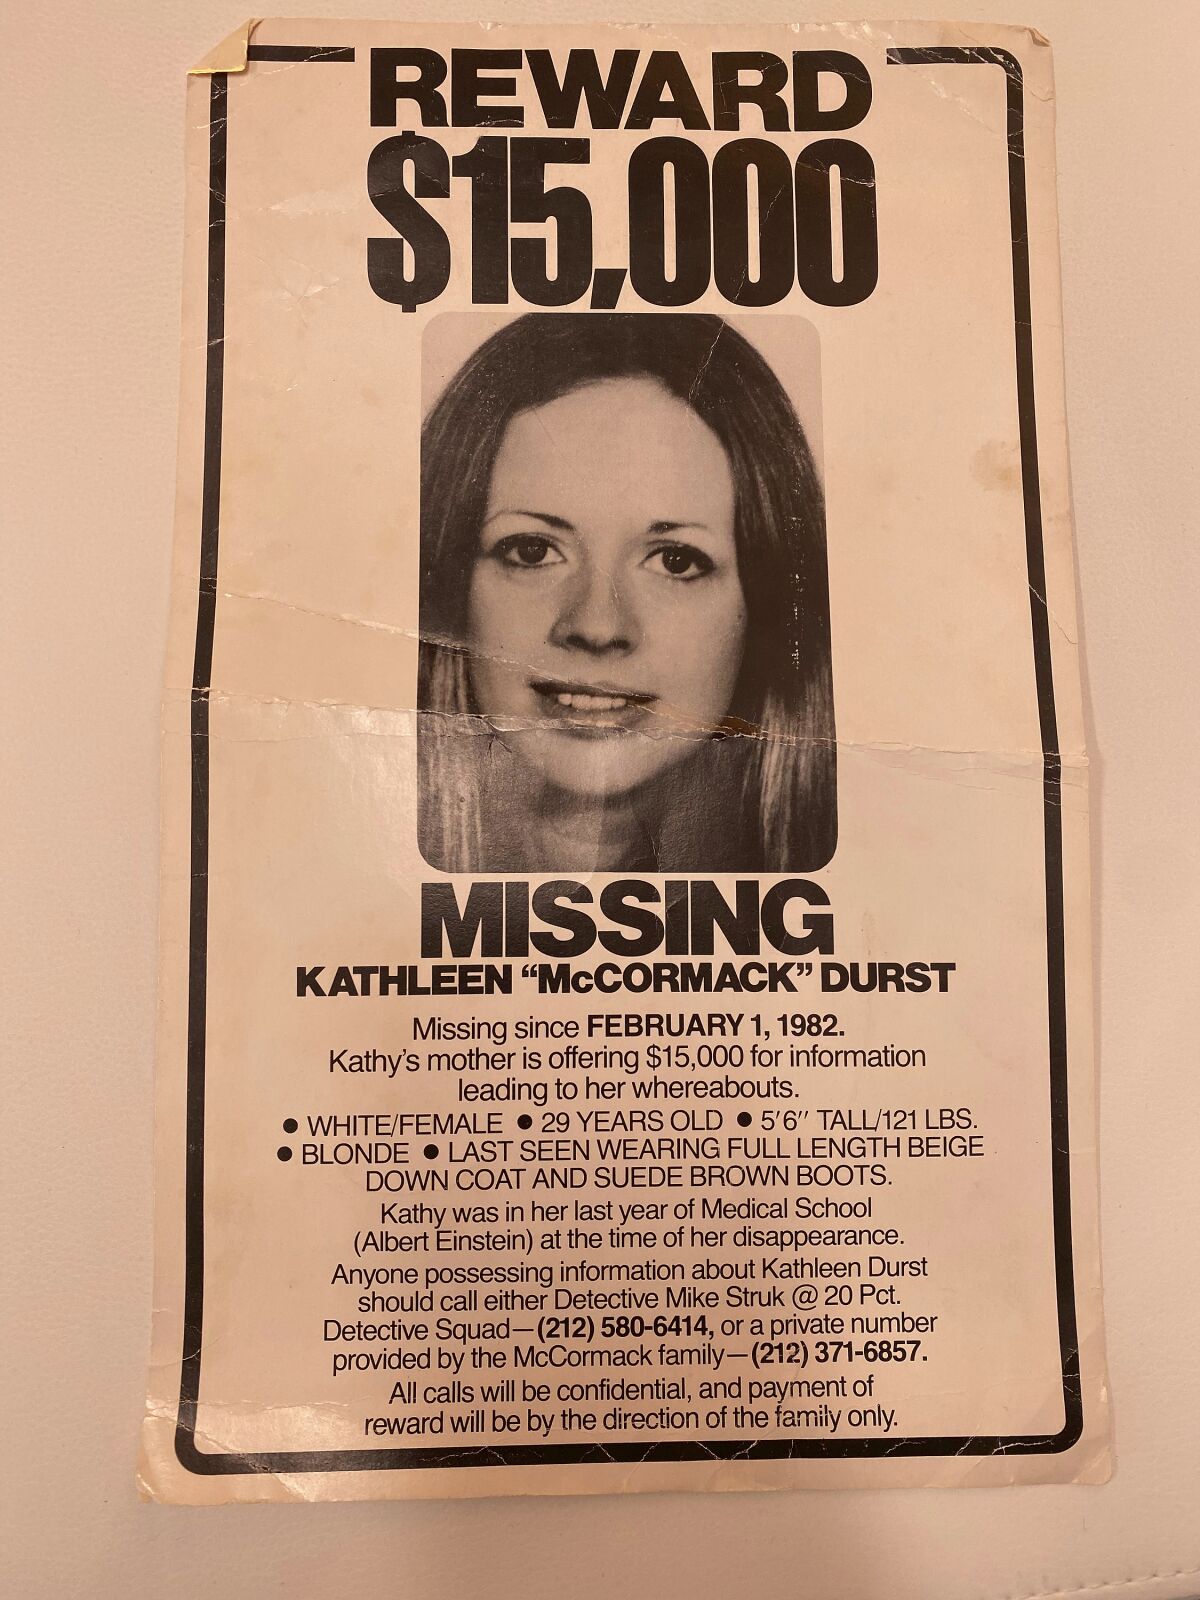 This Thursday, Jan. 14, 2022, photo released by Jim McCormack shows a vintage reward poster for Kathleen "McCormack" Durst, missing since February 1, 1982. Kathy's mother offered $15,000 at the time, for information about her whereabouts. A quest for the fortune left behind by Robert Durst is underway just days after his death. A lawyer for the family of his missing first wife notified the real estate tycoon’s trust Tuesday, Jan. 11, 2022 that it would be seeking more than $100 million from Durst’s estate and widow. (Jim McCormack via AP)